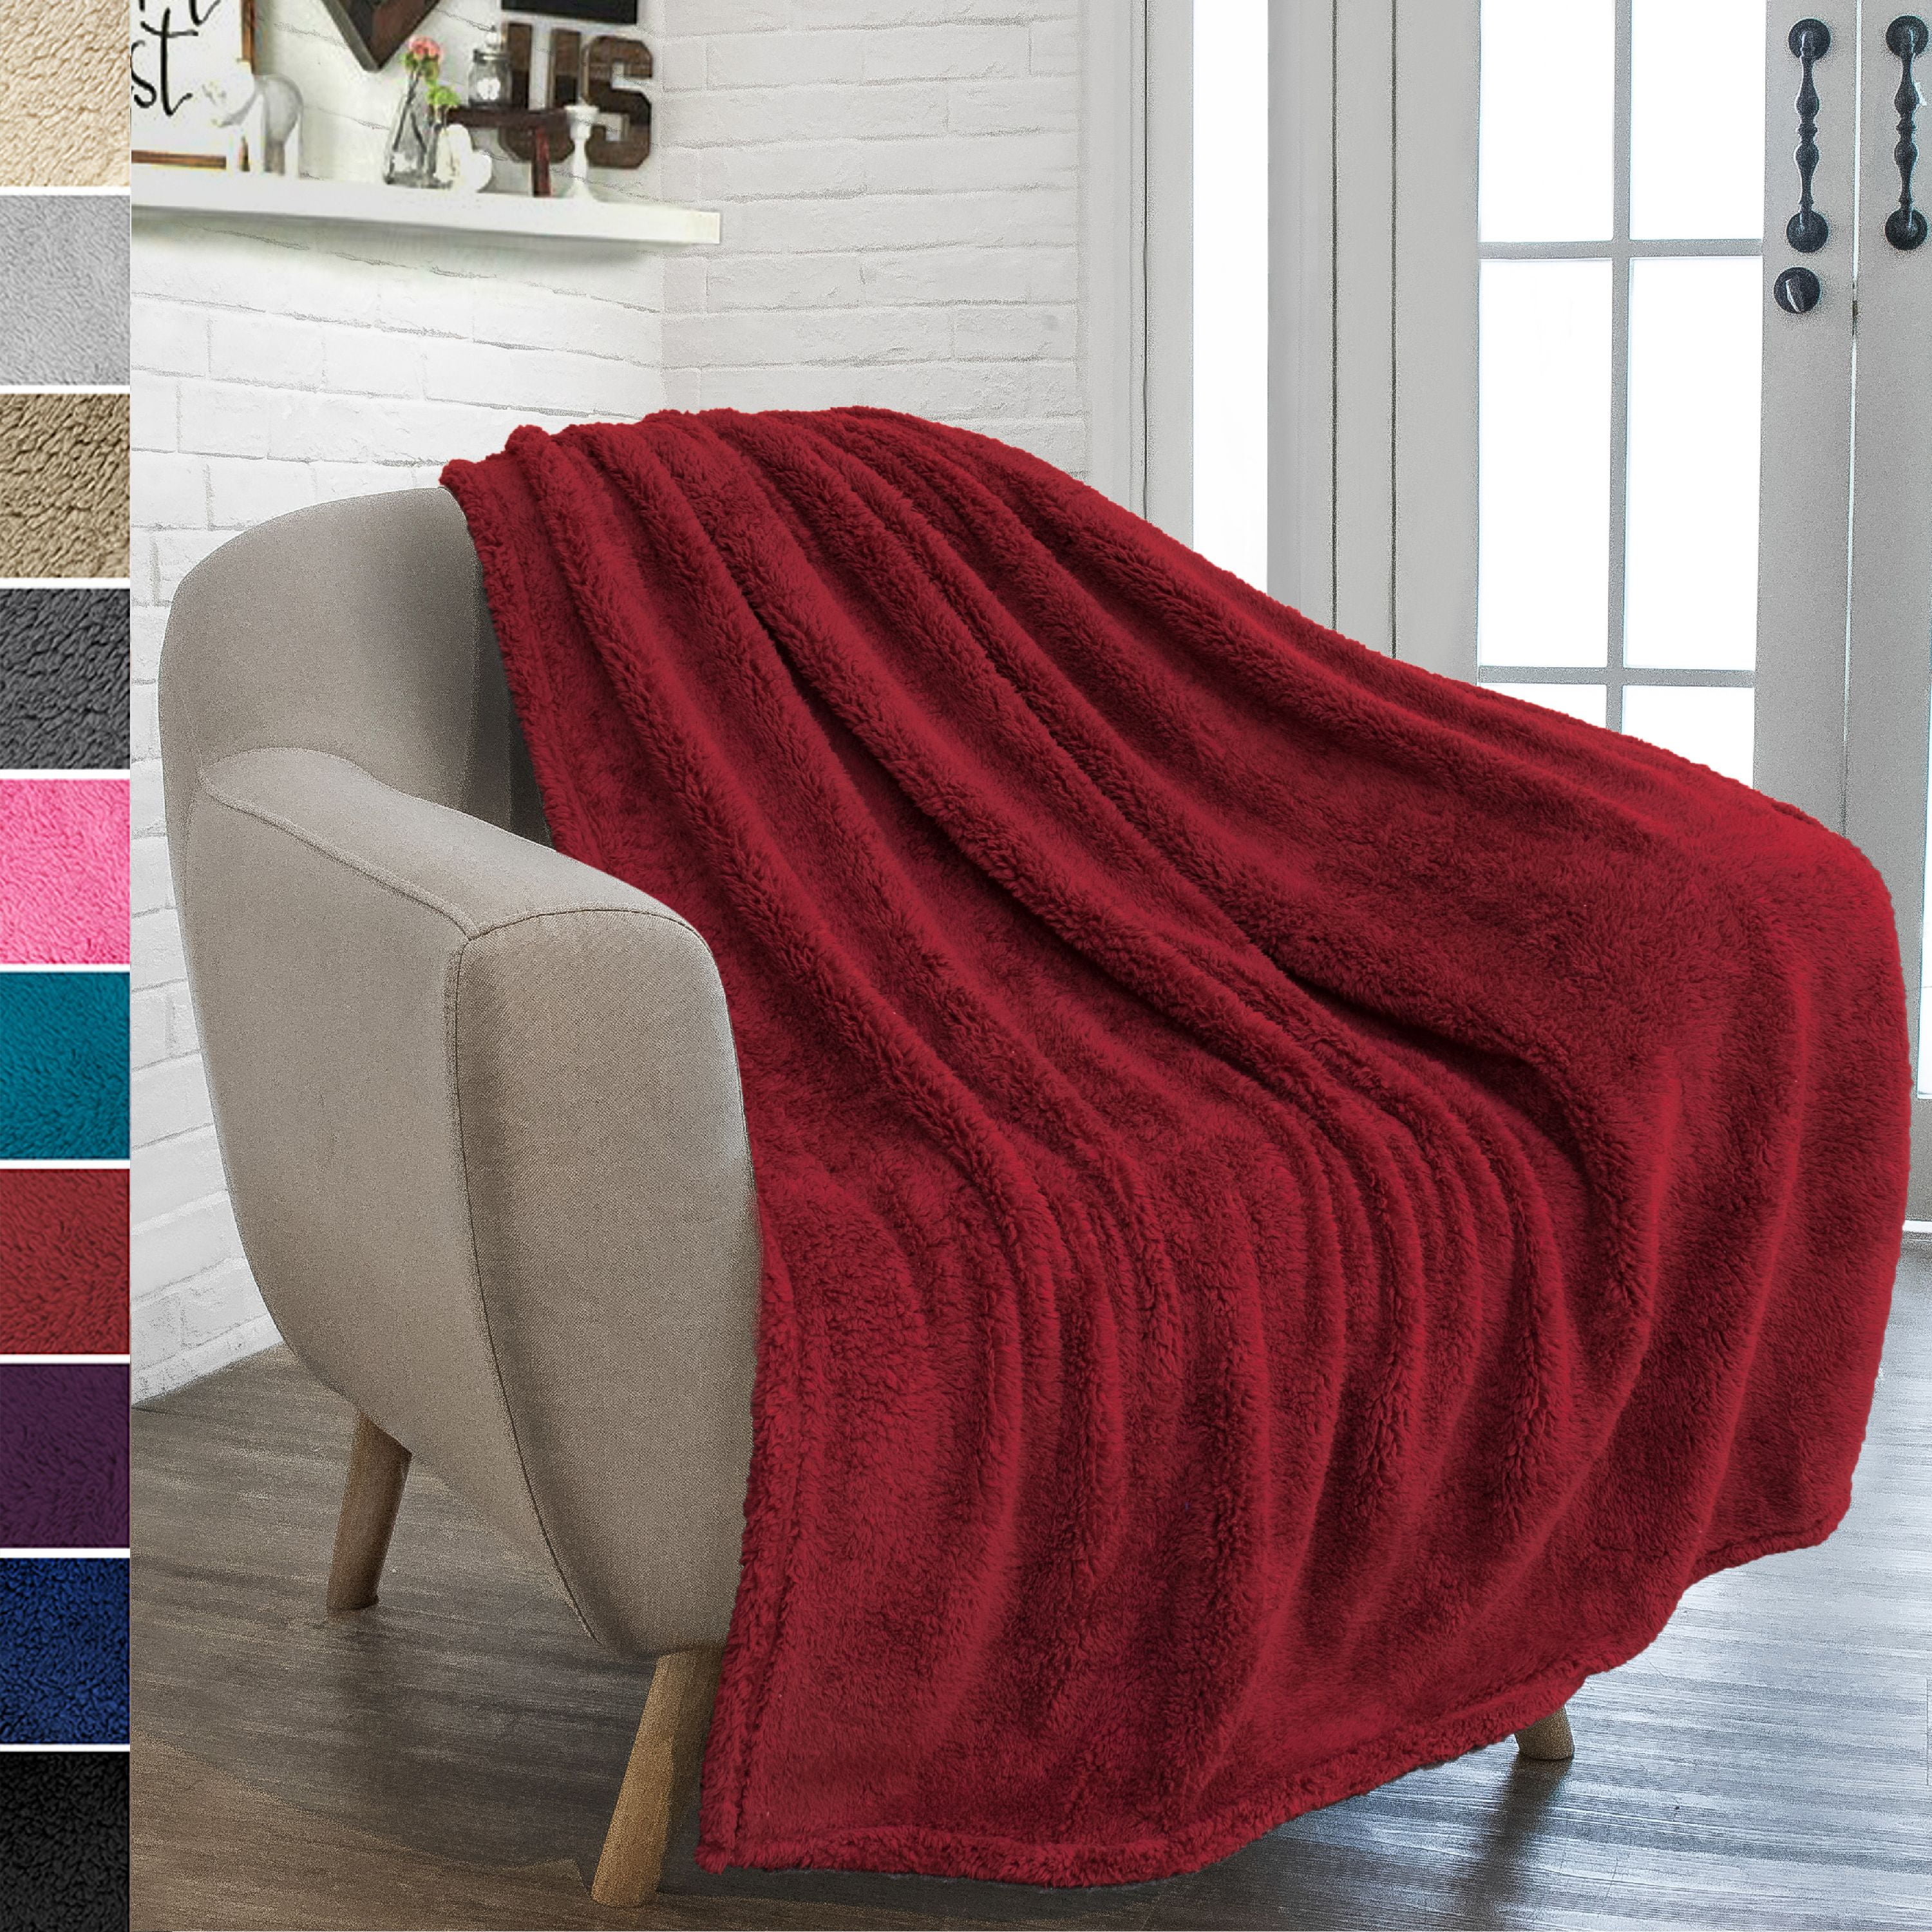 Fleece Throws Blanket for Bed Chair Super Soft Microfiber Fuzzy Cozy Shaggy Lightweight Sherpa Blanket for Living Room&Office 127 x 152cm Navy Throw Blankets for Couch Sofas 